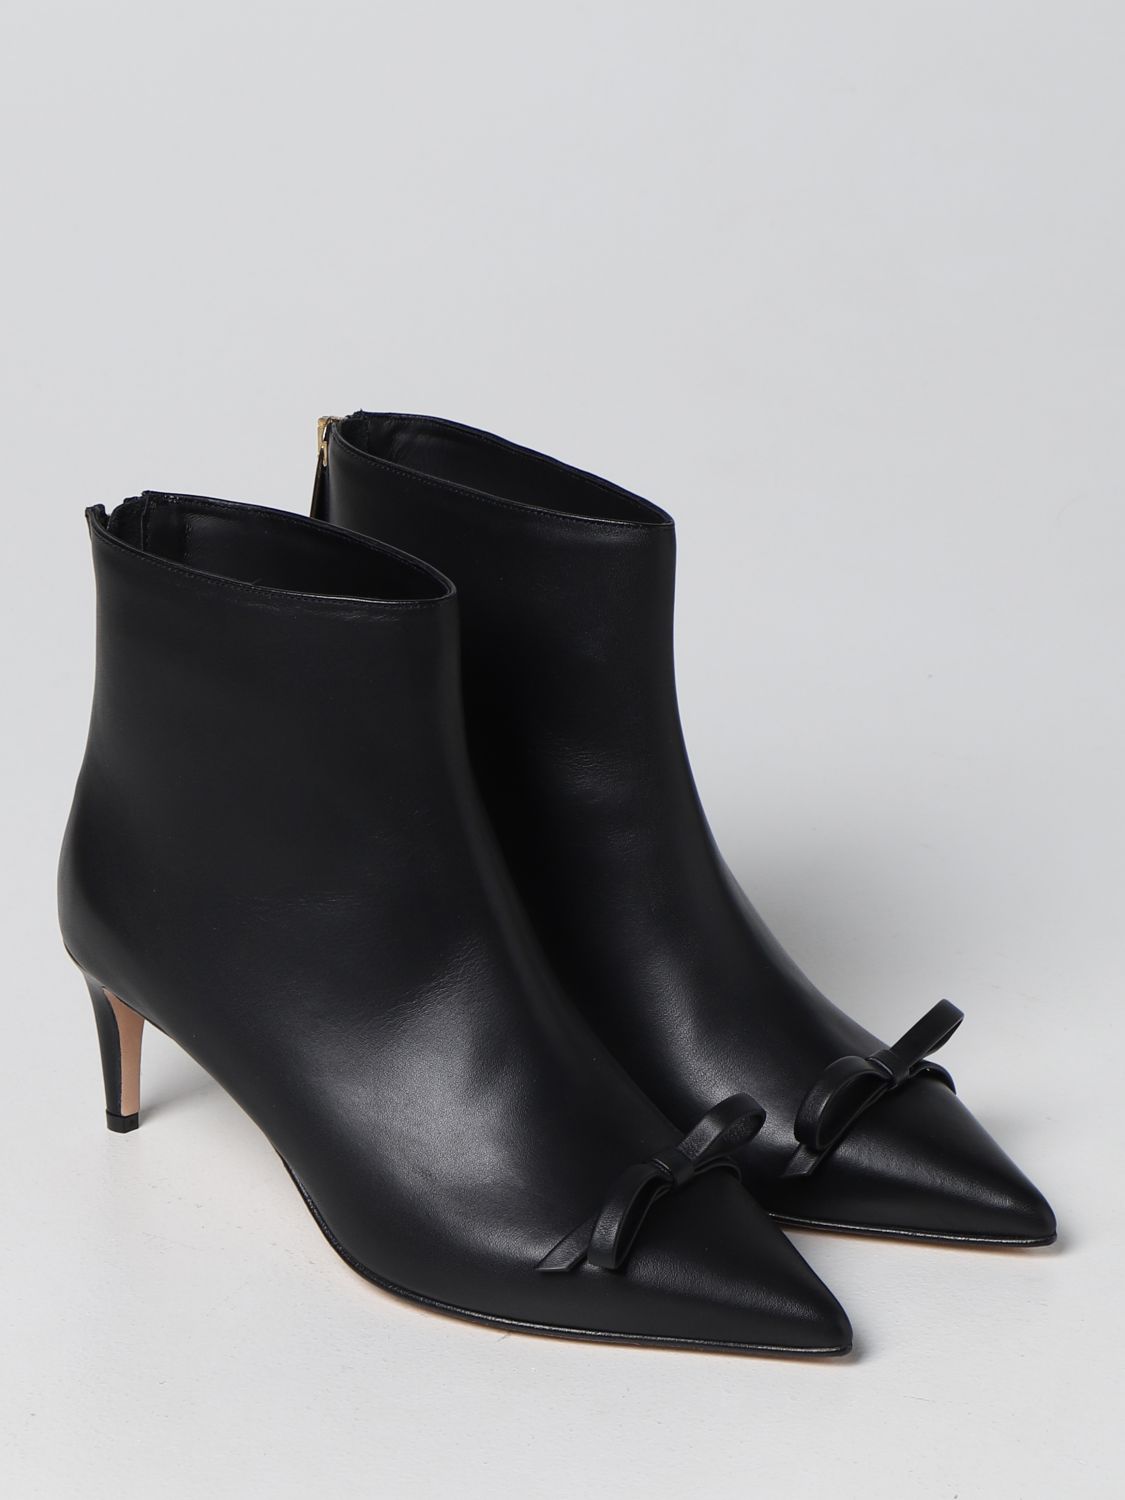 Heeled ankle boots Red(V): Red (V) ankle boots in smooth leather black 2